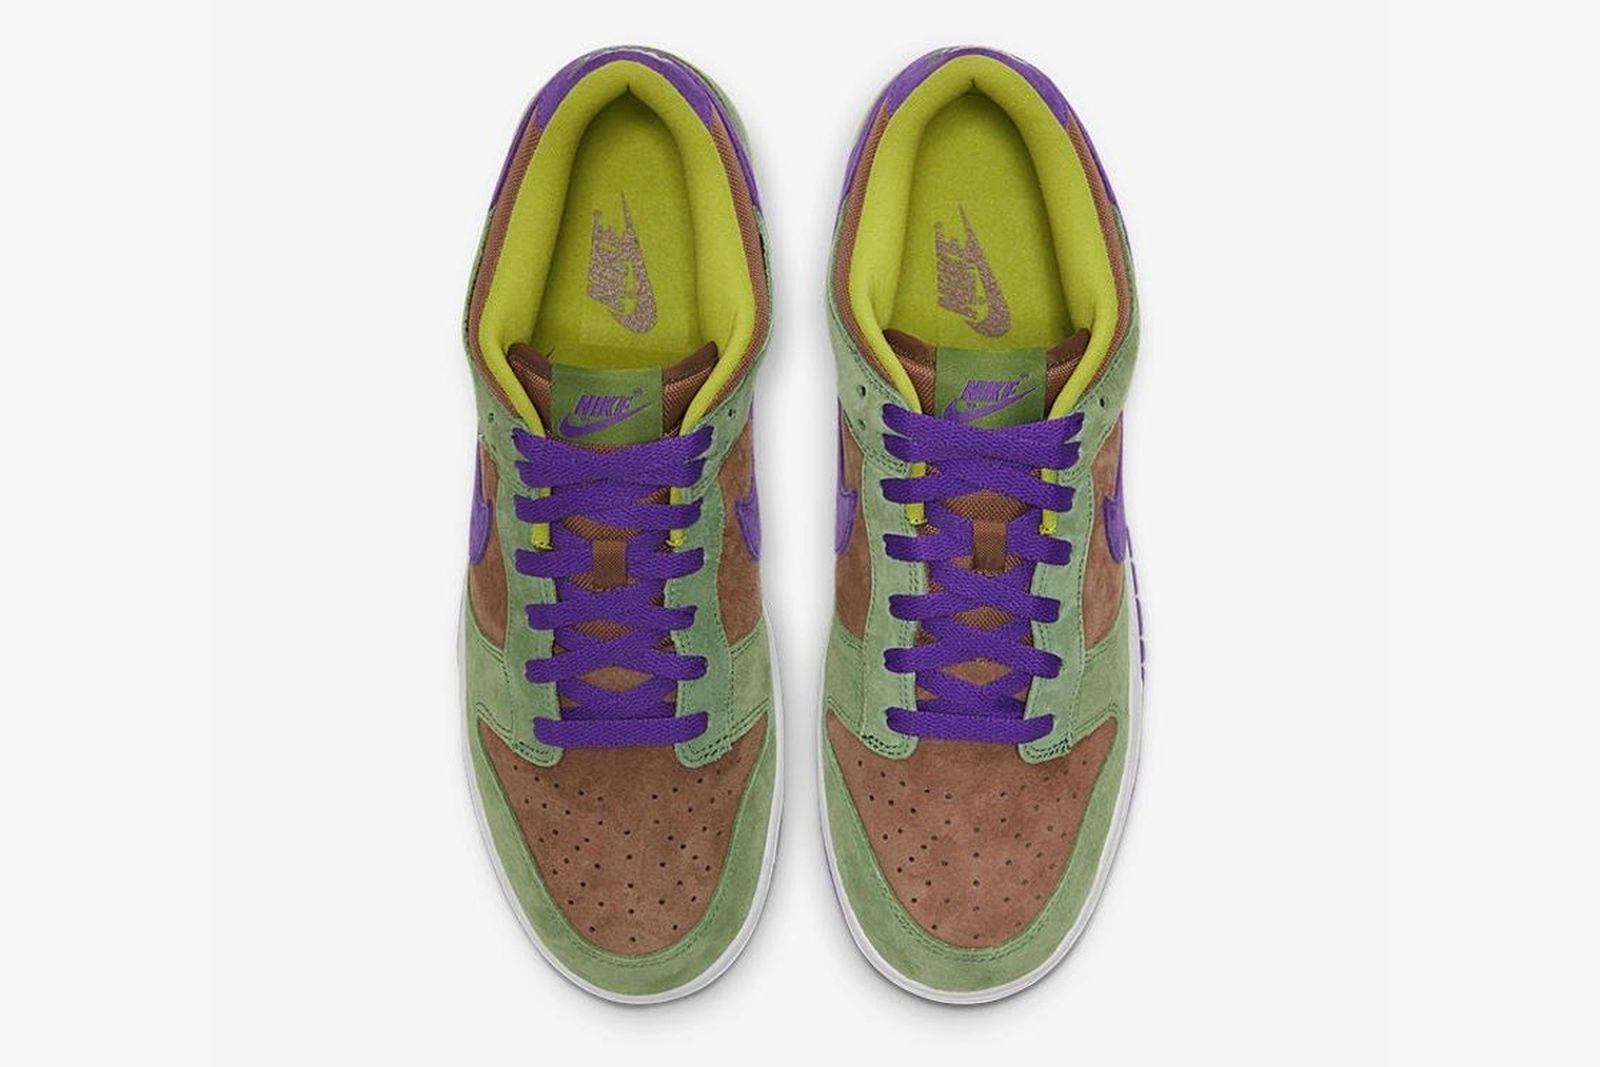 Nike veneer dunks SNKRS Is Giving Out Early Access to Another Dunk Today